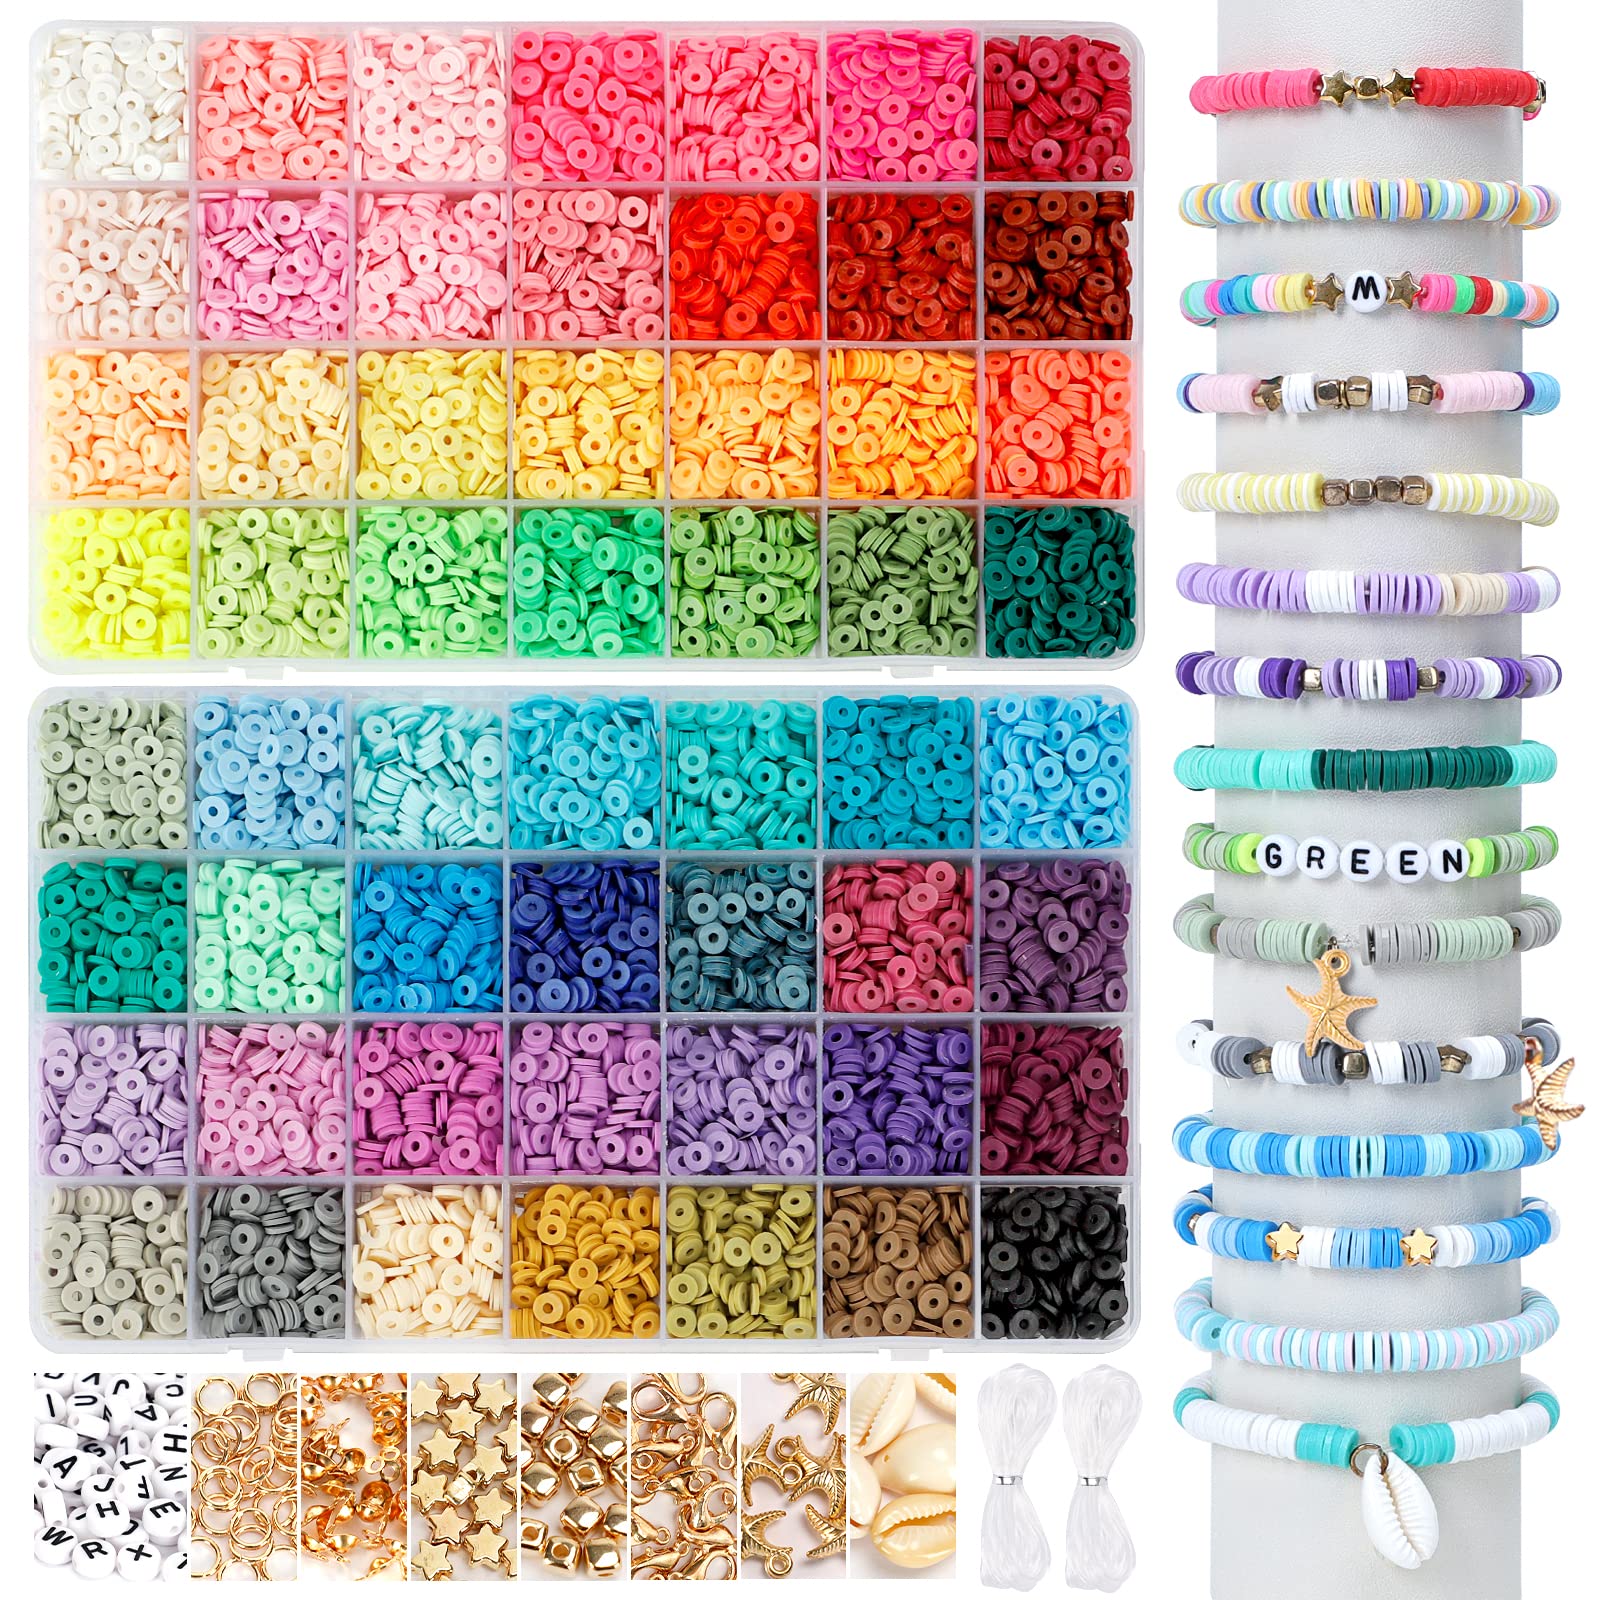 Amazon.com: Easter Basket Stuffers for Kids, Friendship Bracelet Making Kit  for Girls, 6 7 8 9 10 11 12+ Year Old Girls Gifts Ideas, Arts and Crafts  for Kids Ages 8-12, Jewelry